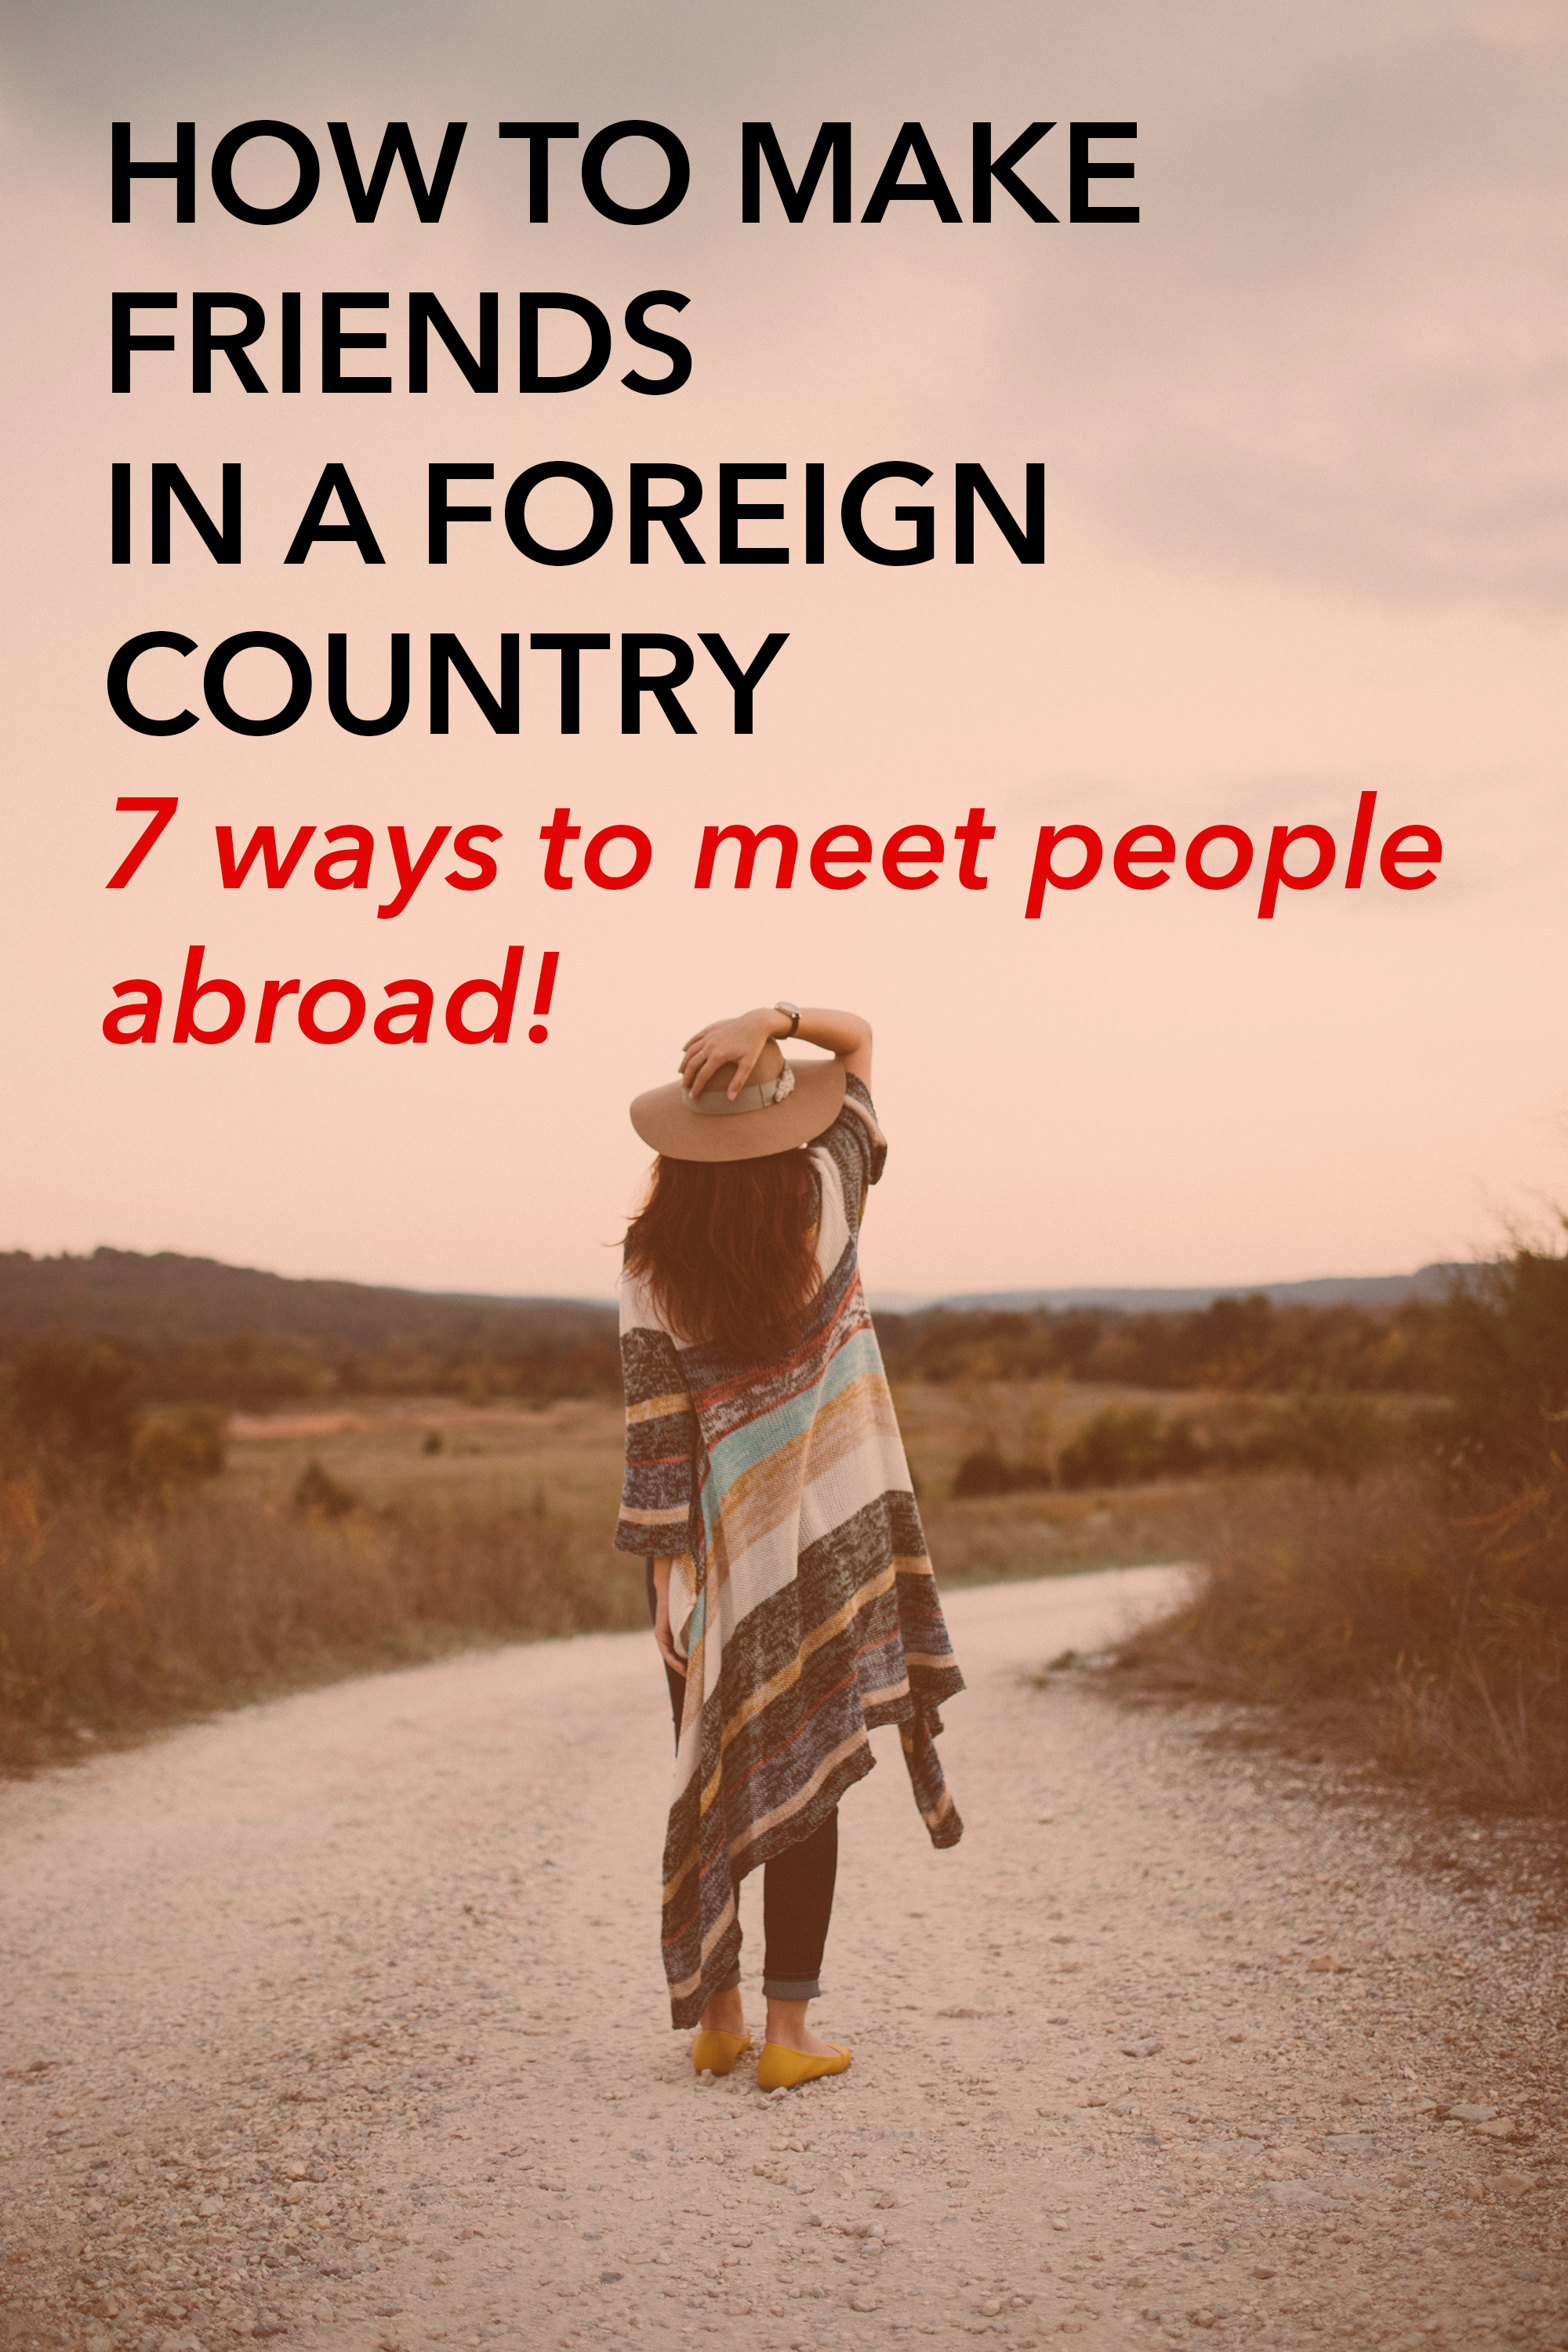 Online friends :: Get friends from foreign countries